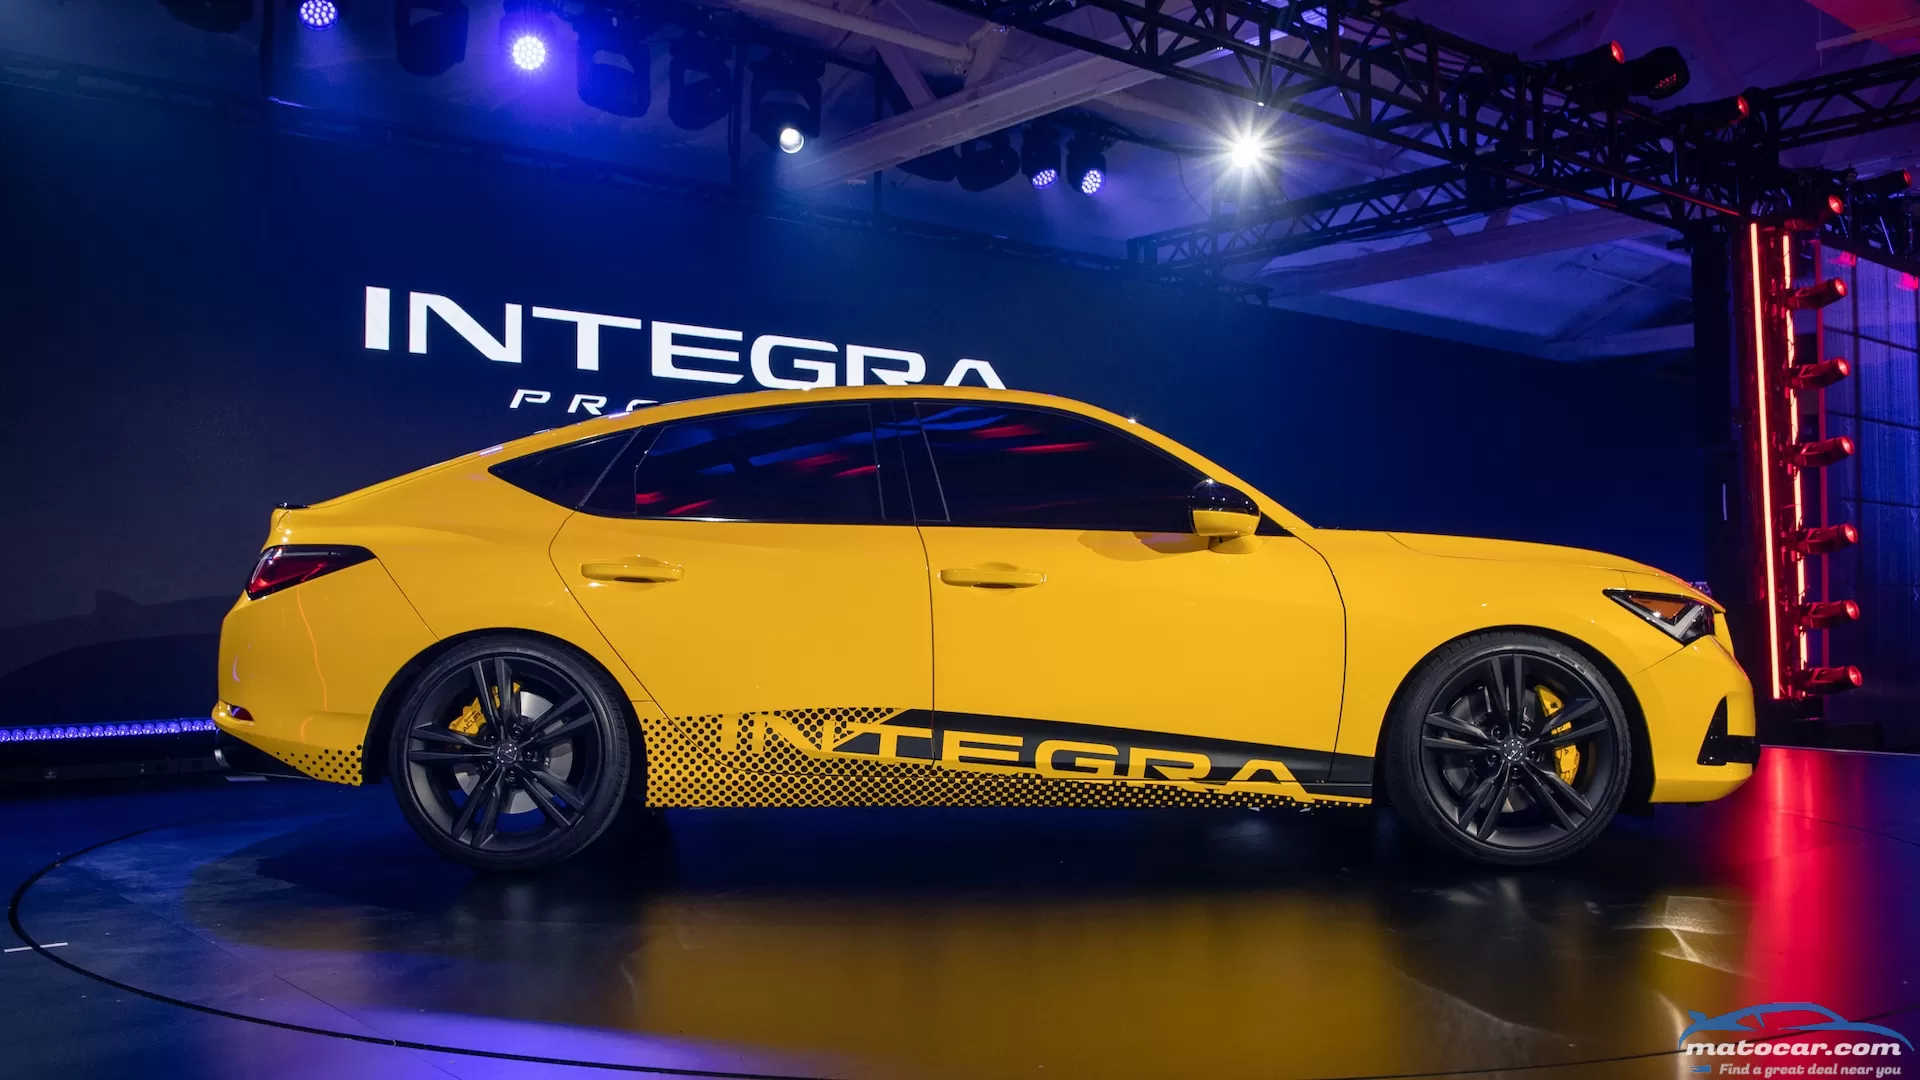 You Can Order a New 2023 Acura Integra Starting In March